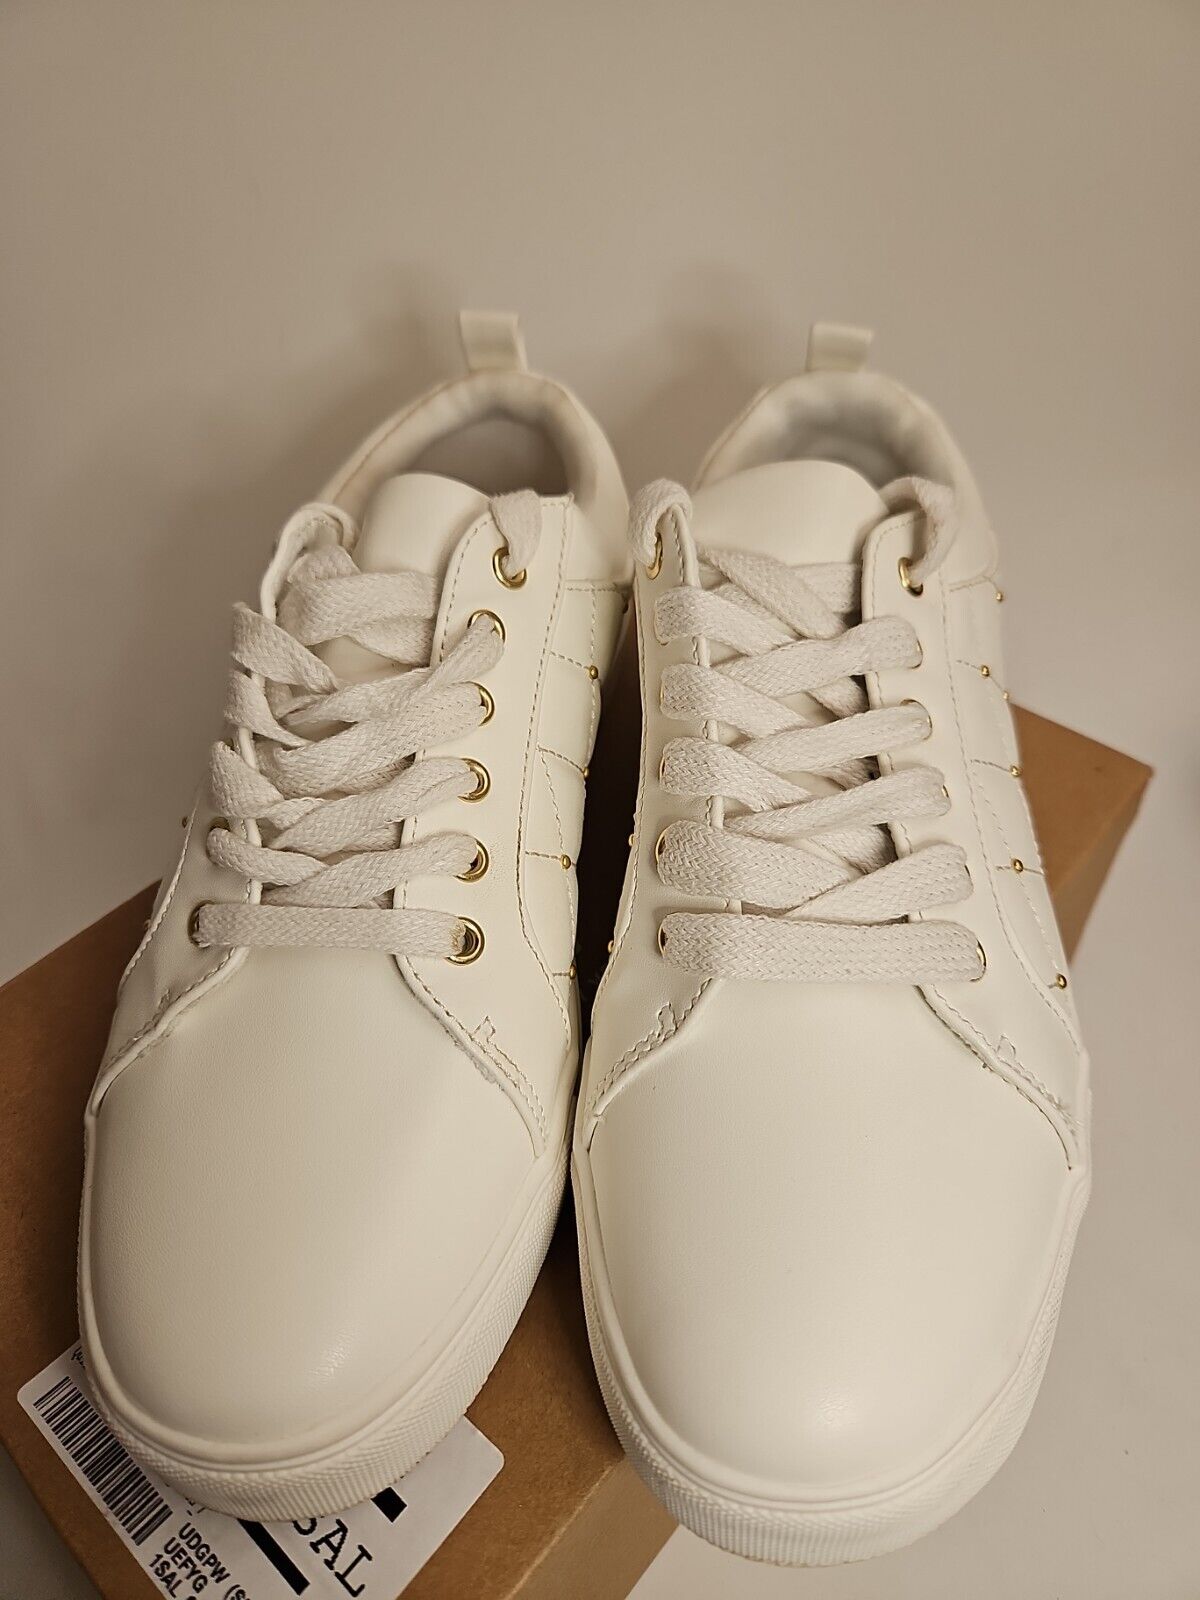 Everyday Womens Quilted White Stud Trainer Size 7 **** VS3